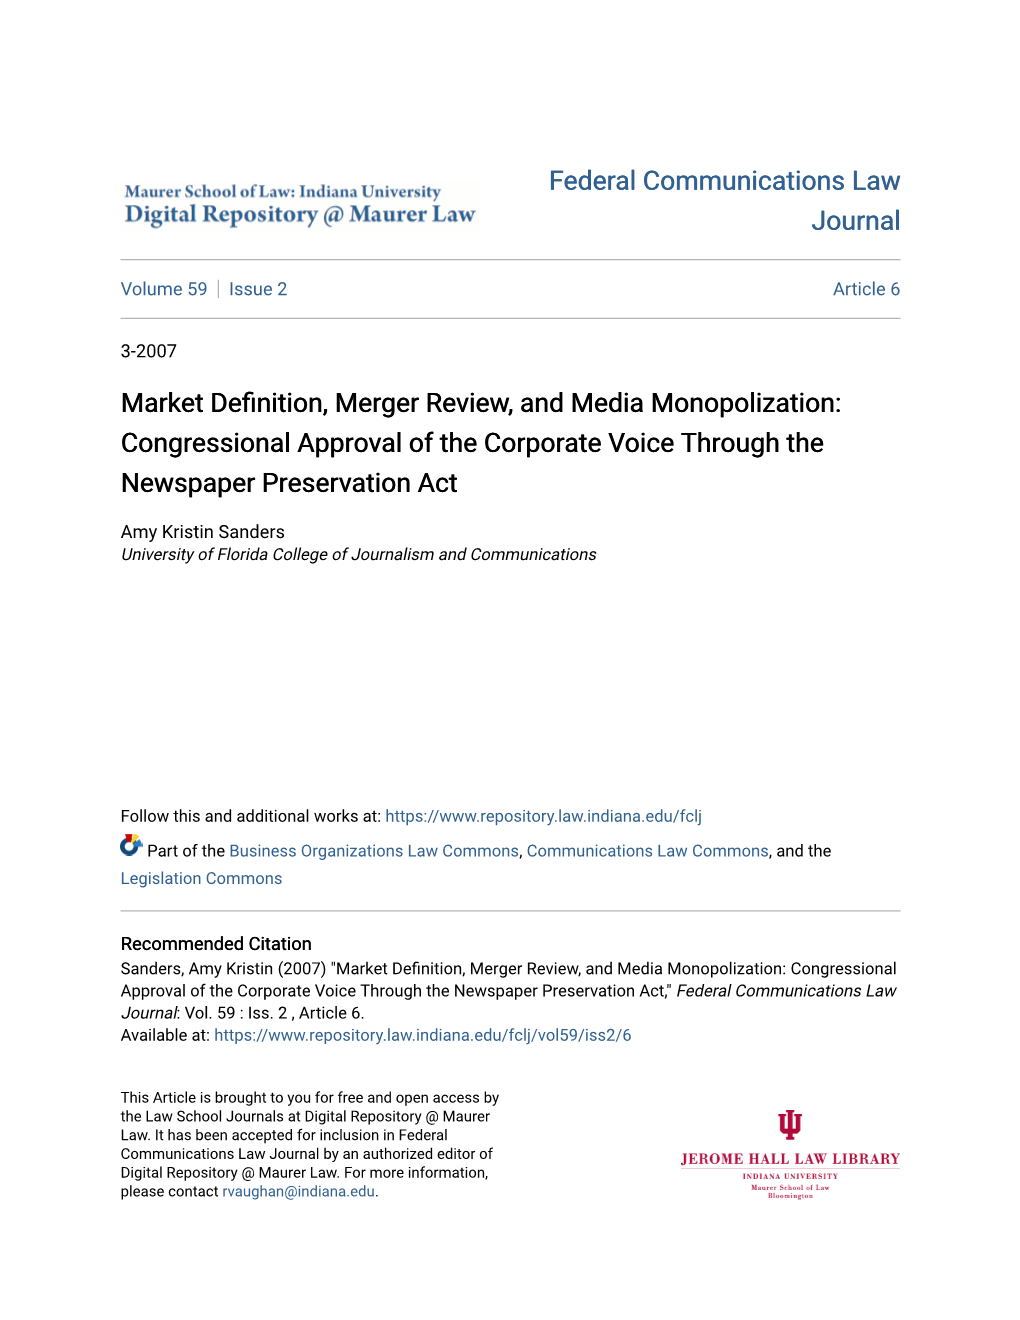 Market Definition, Merger Review, and Media Monopolization: Congressional Approval of the Corporate Voice Through the Newspaper Preservation Act